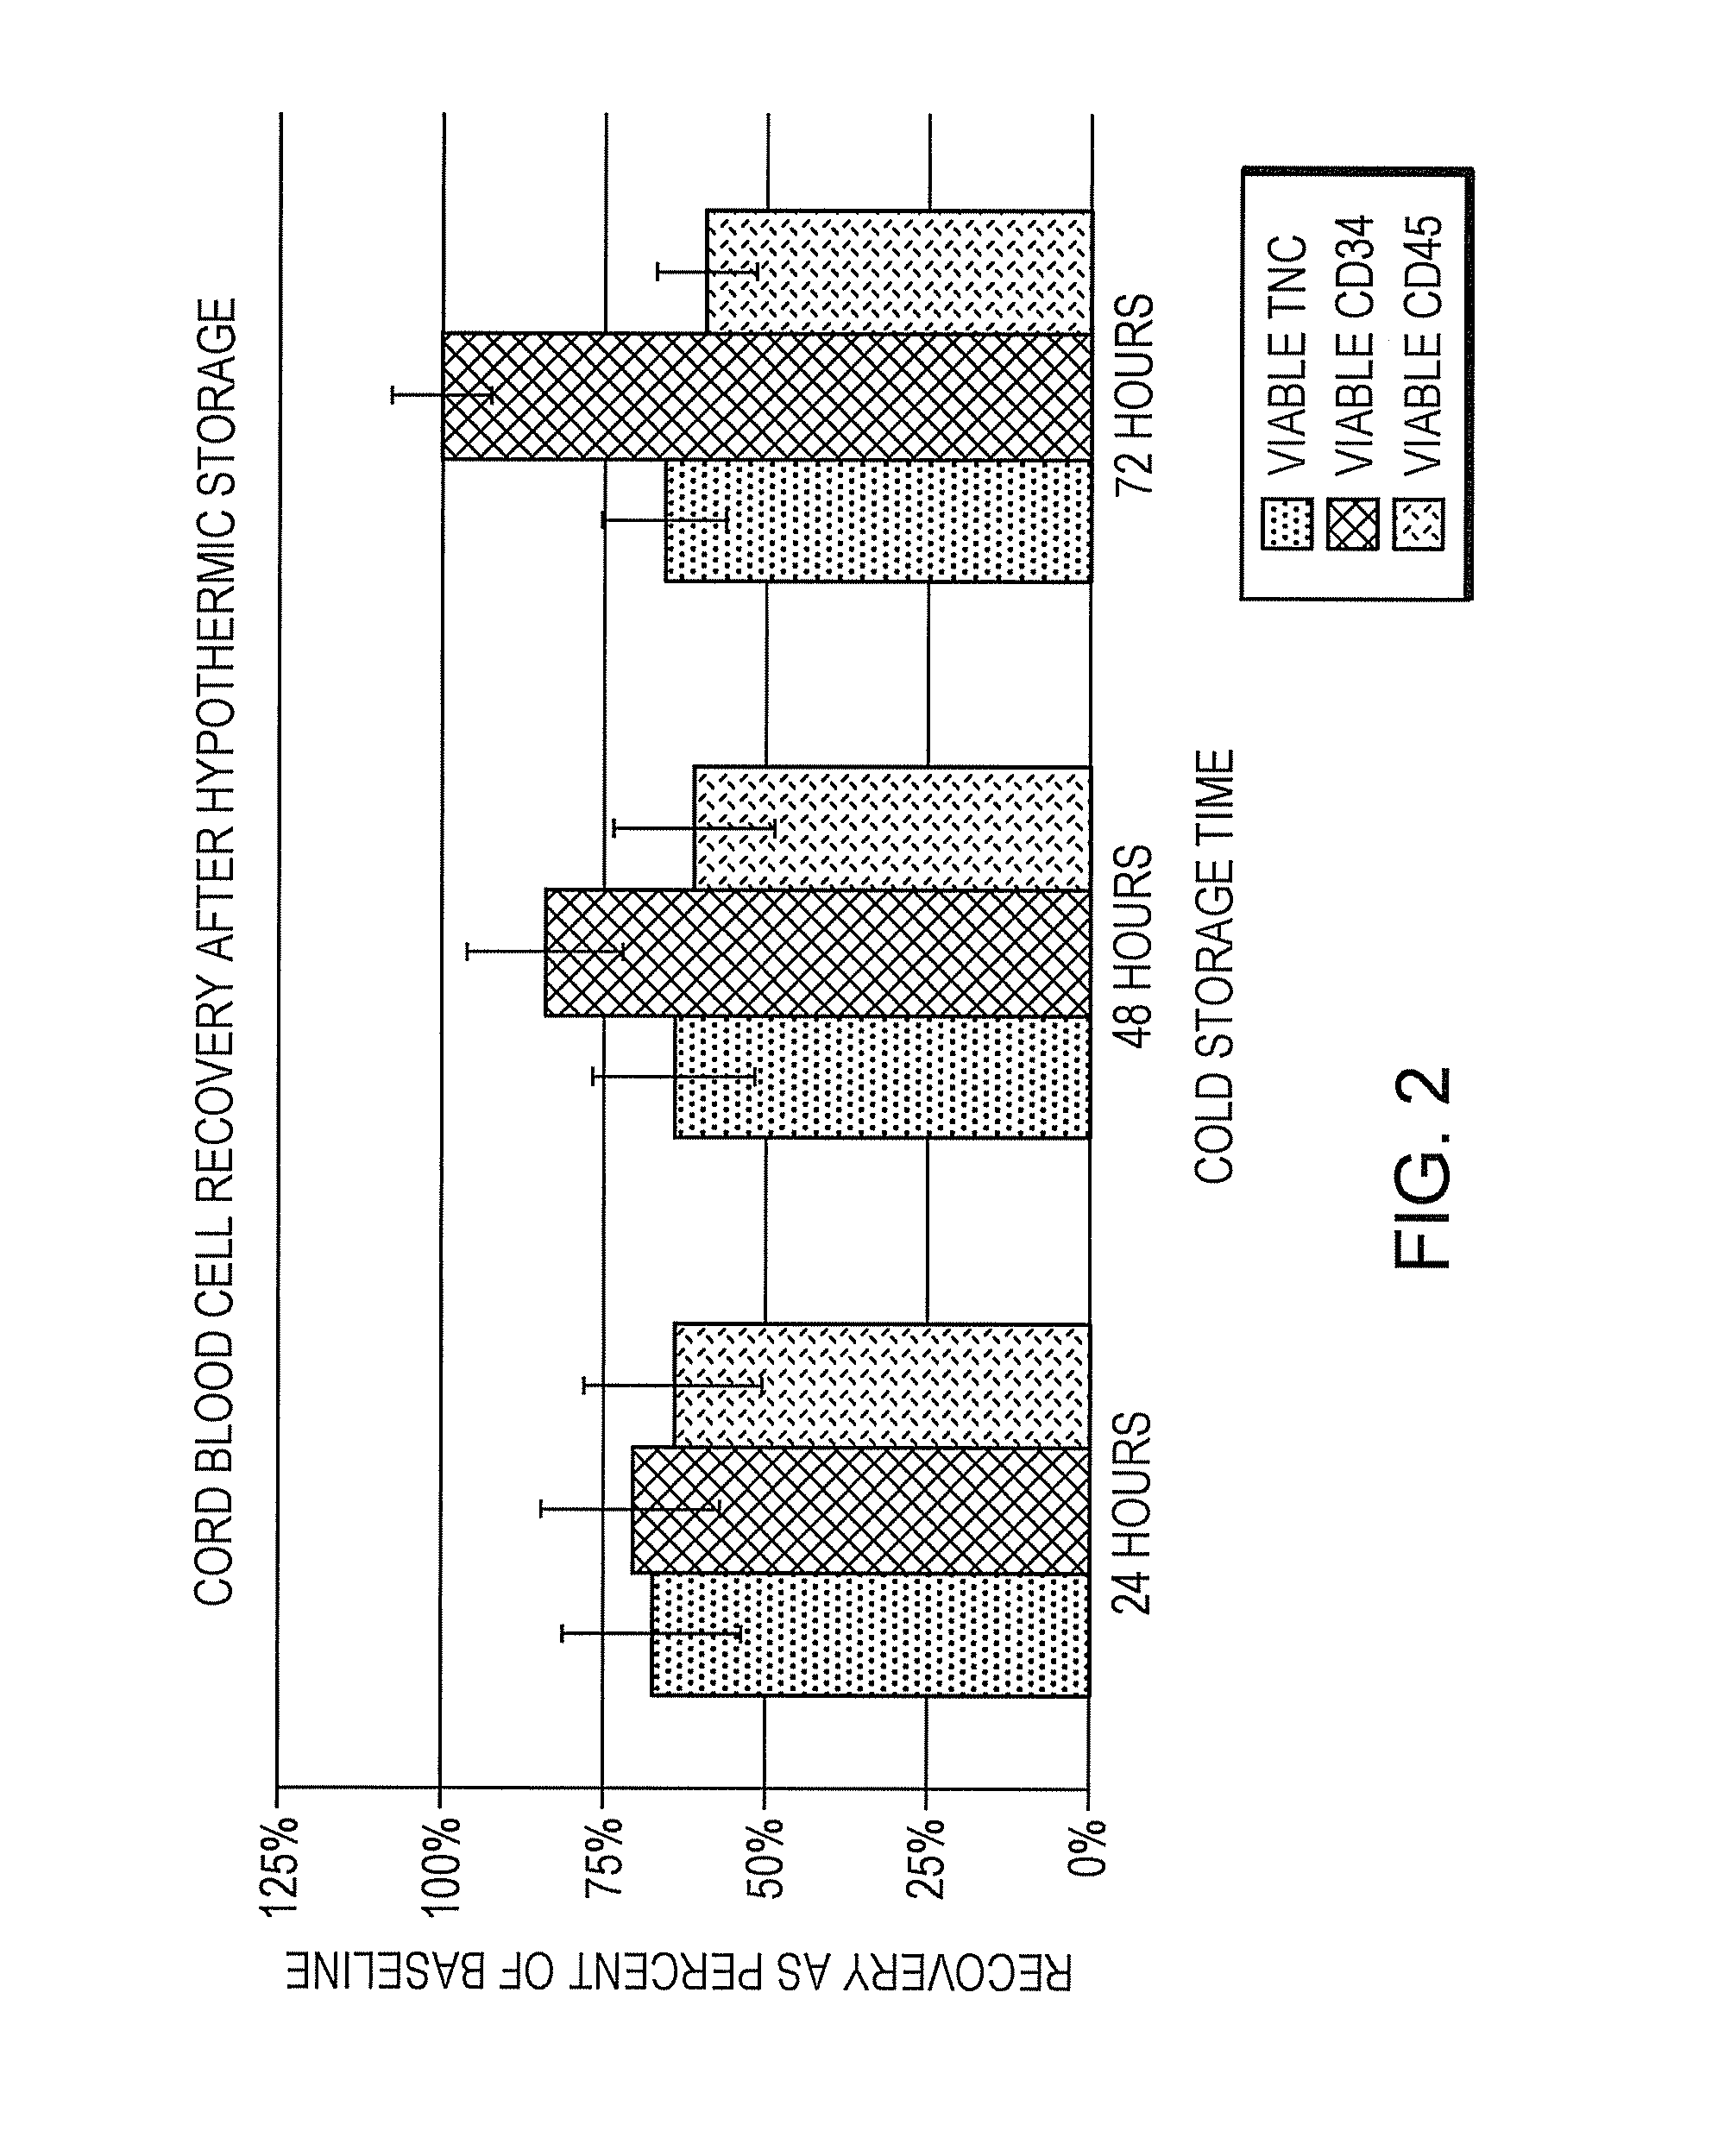 Materials and methods for hypothermic collection of whole blood